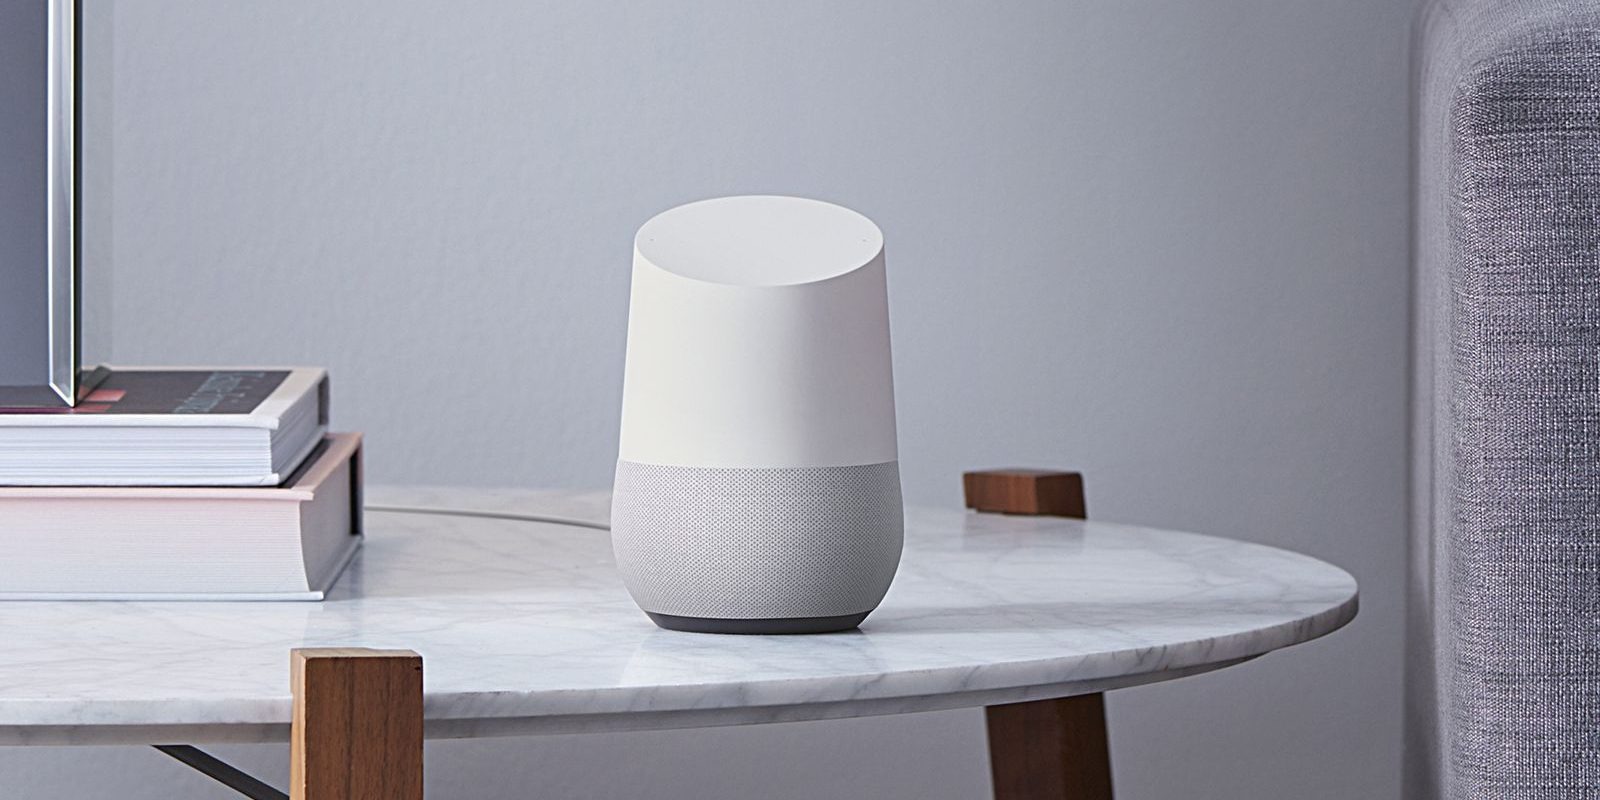 How To Set An Alarm On Google Home